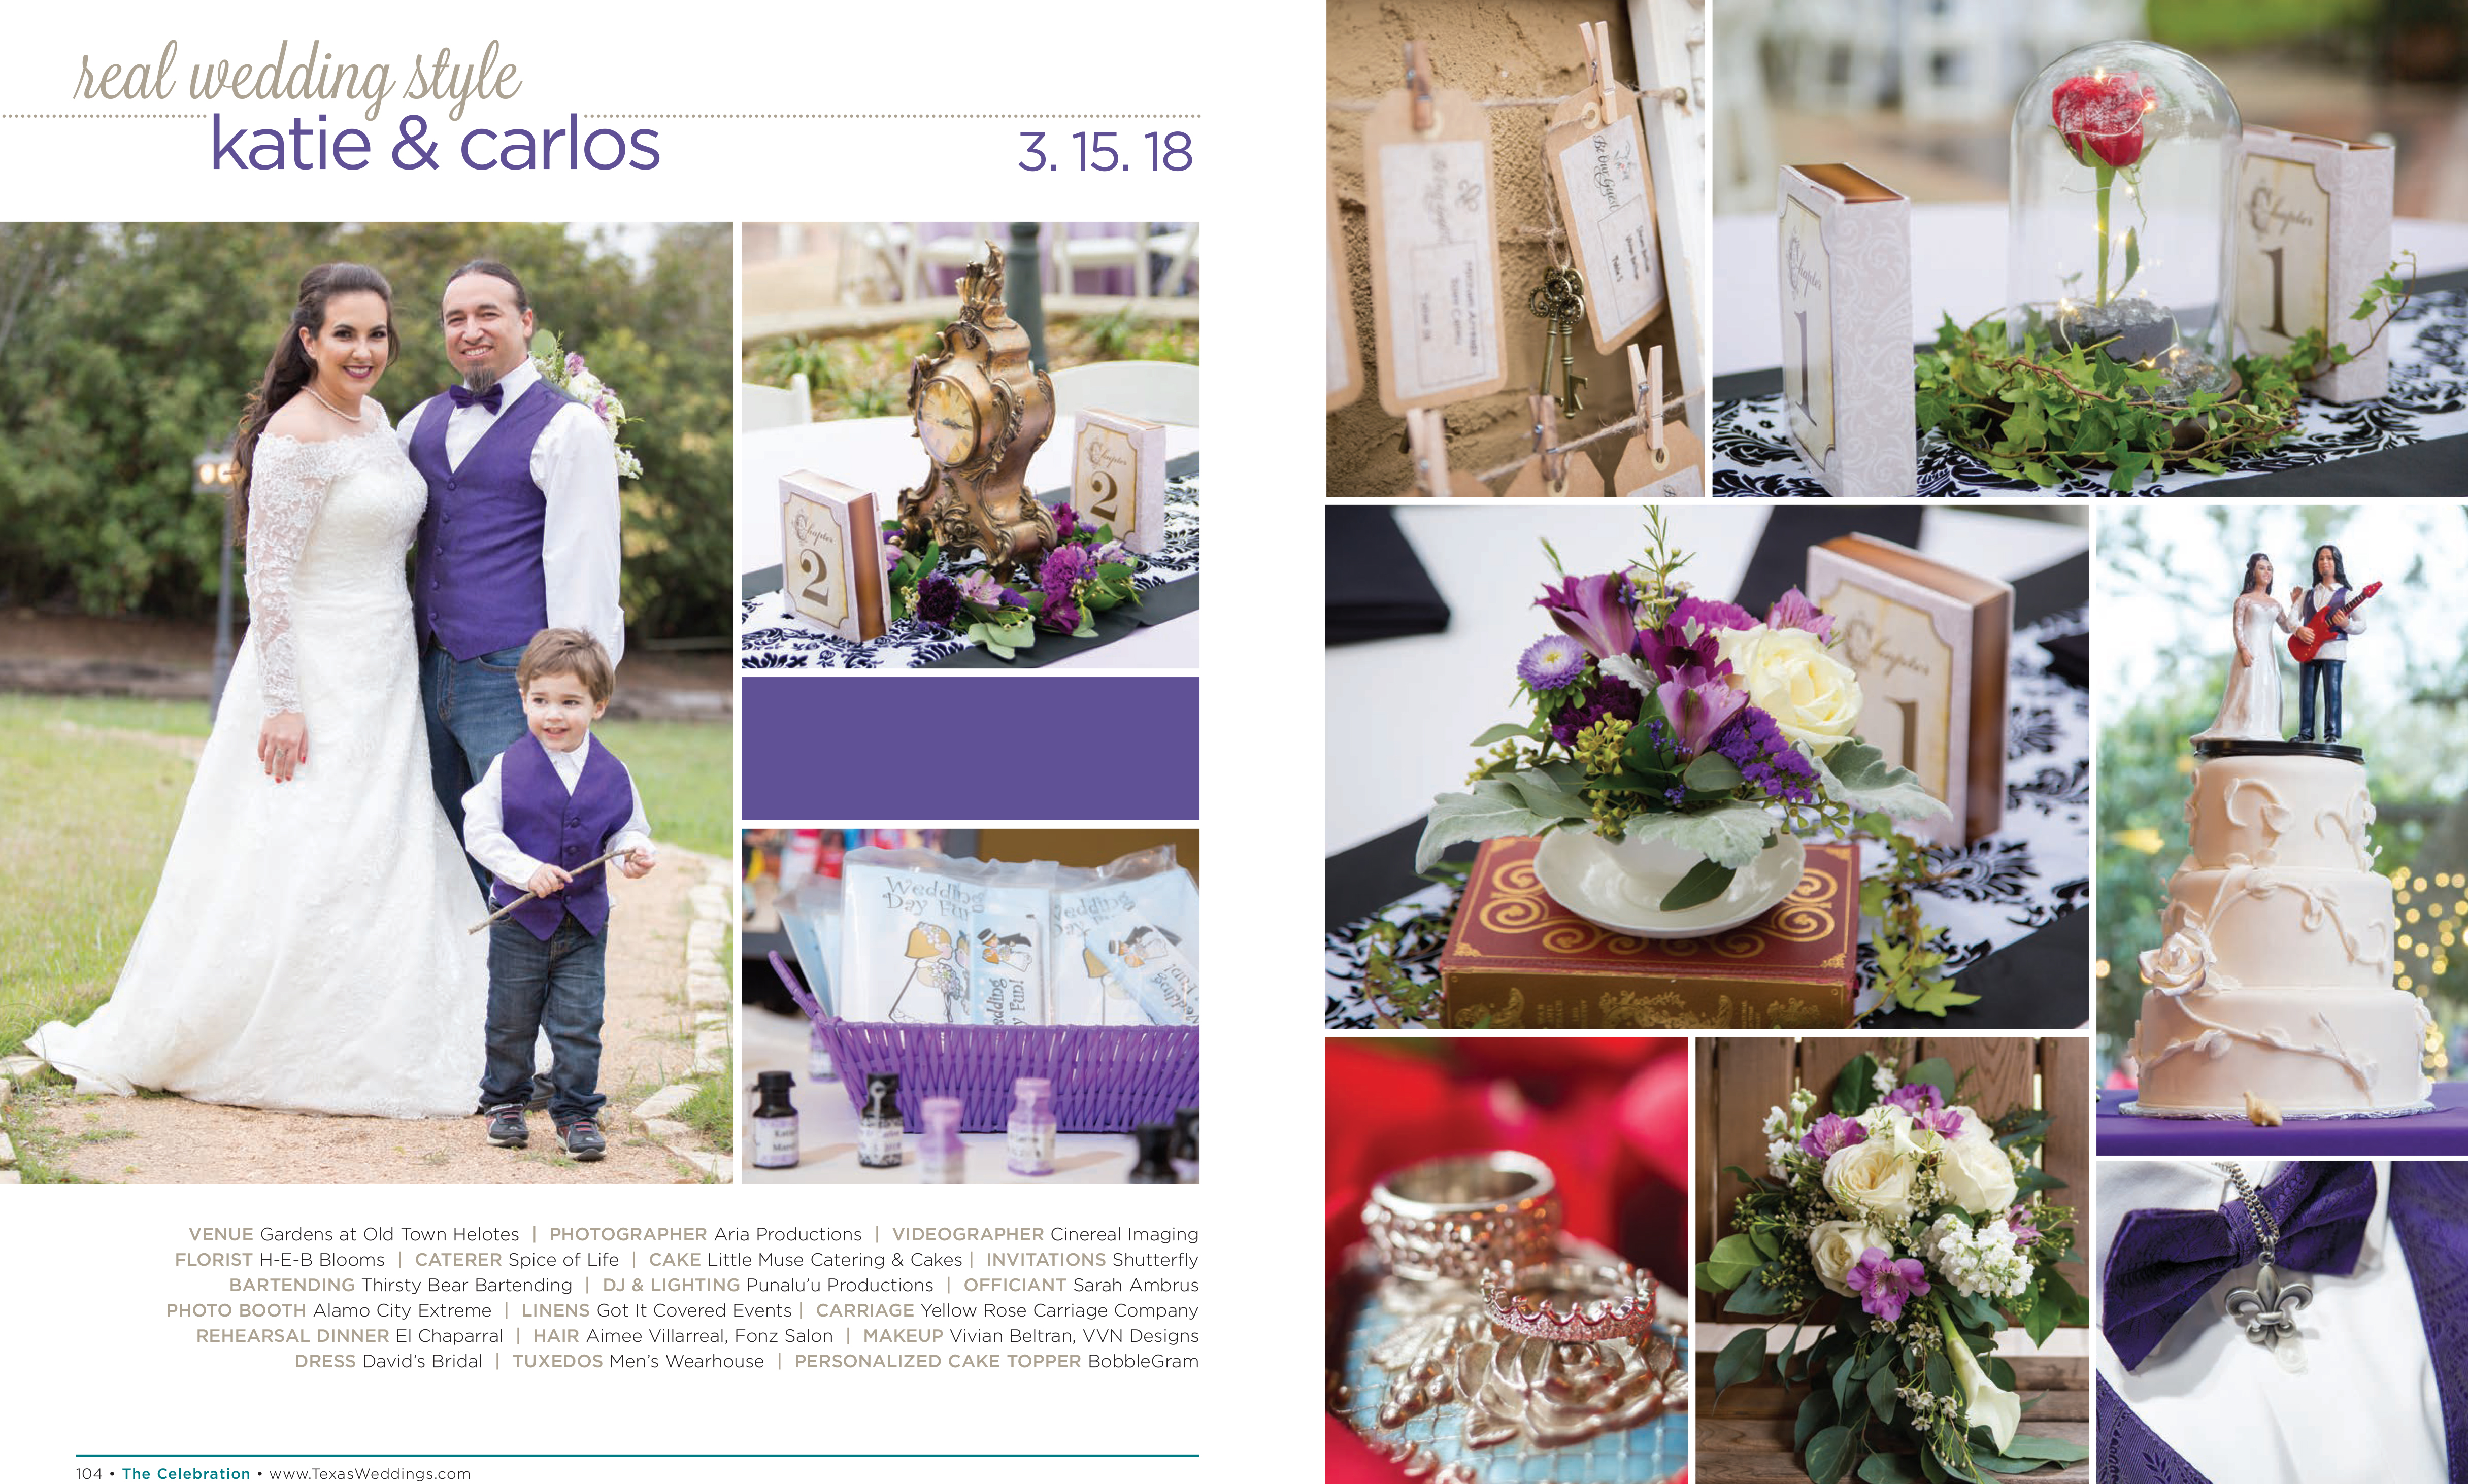 Katie & Carlos in their Real Wedding Page in the Fall/Winter 2018 Texas Wedding Guide